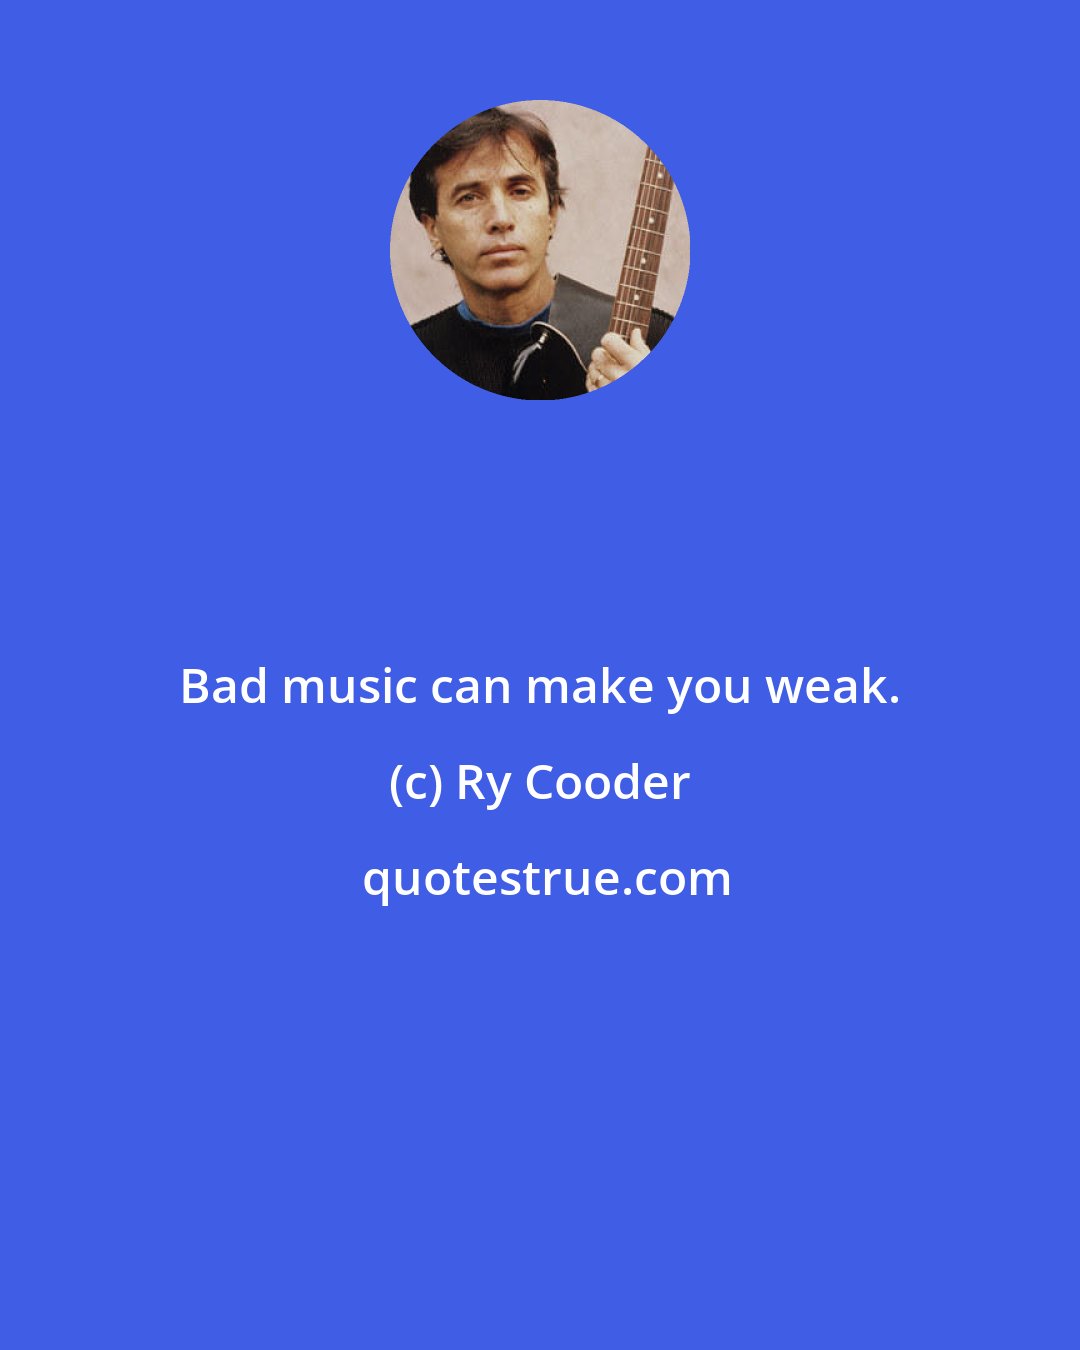 Ry Cooder: Bad music can make you weak.